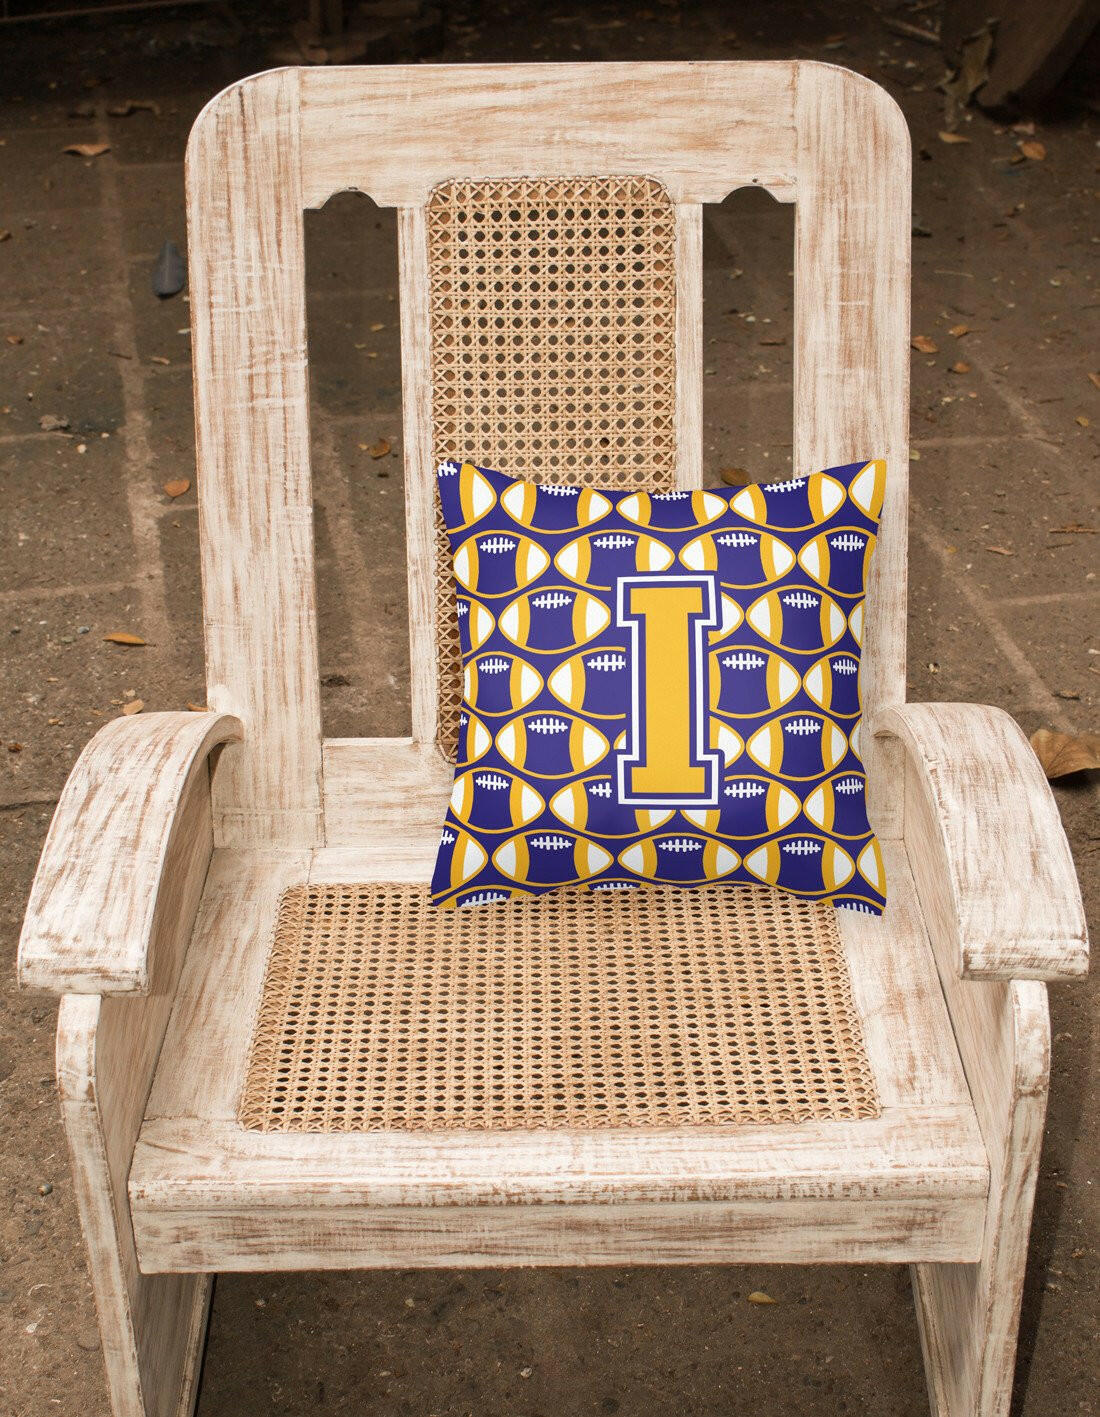 Letter I Football Purple and Gold Fabric Decorative Pillow CJ1064-IPW1414 by Caroline's Treasures